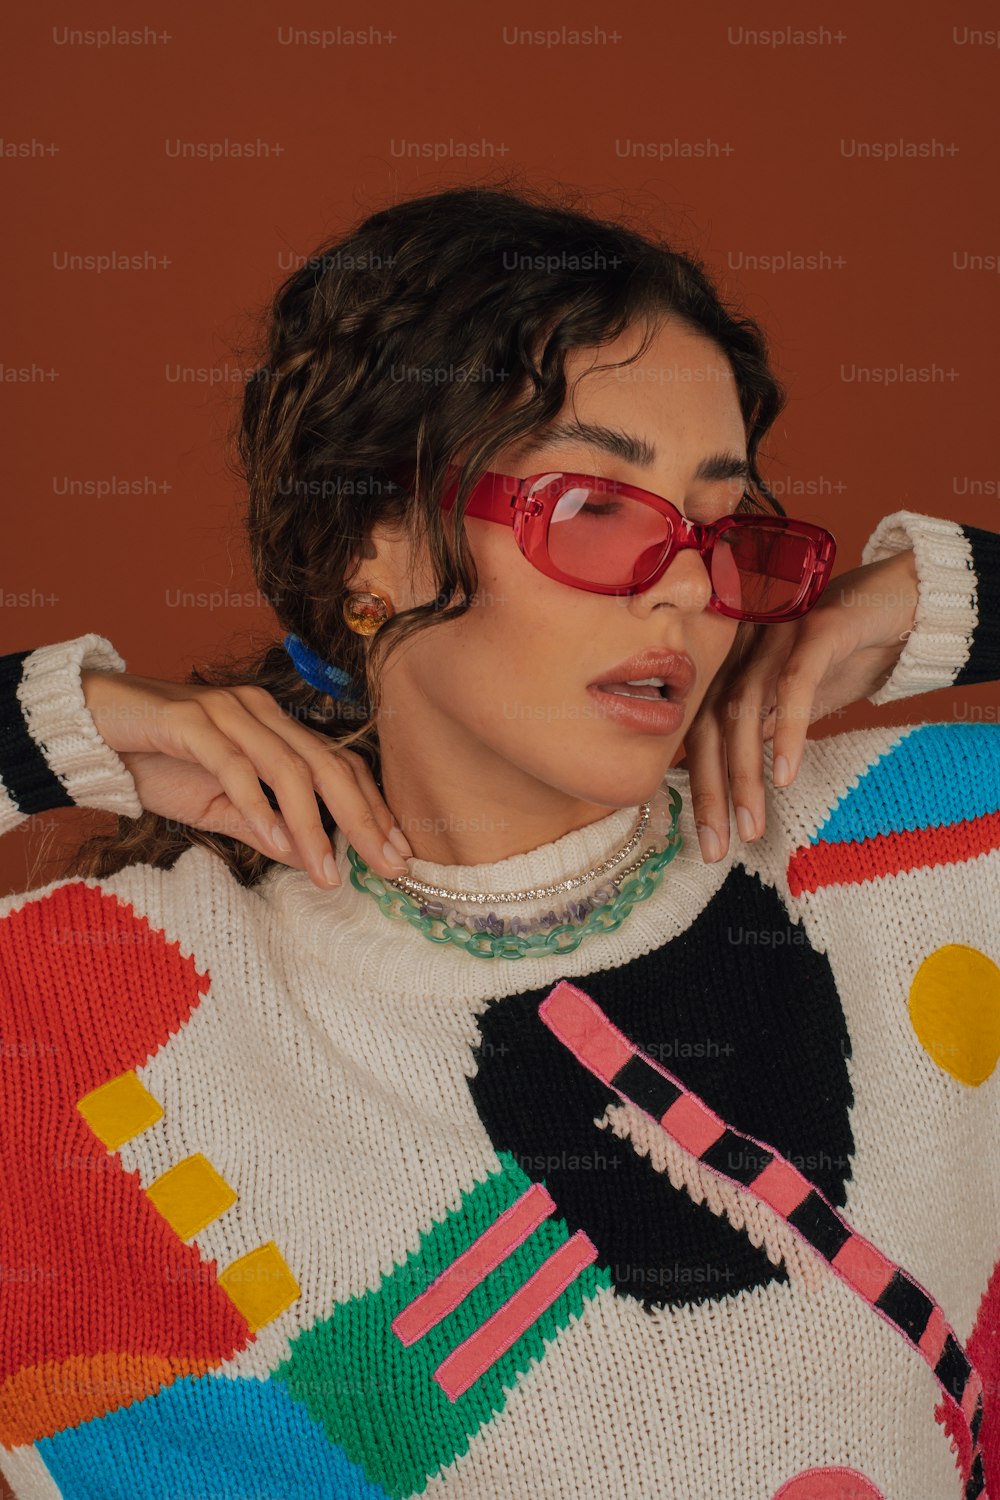 a woman wearing red glasses and a colorful sweater